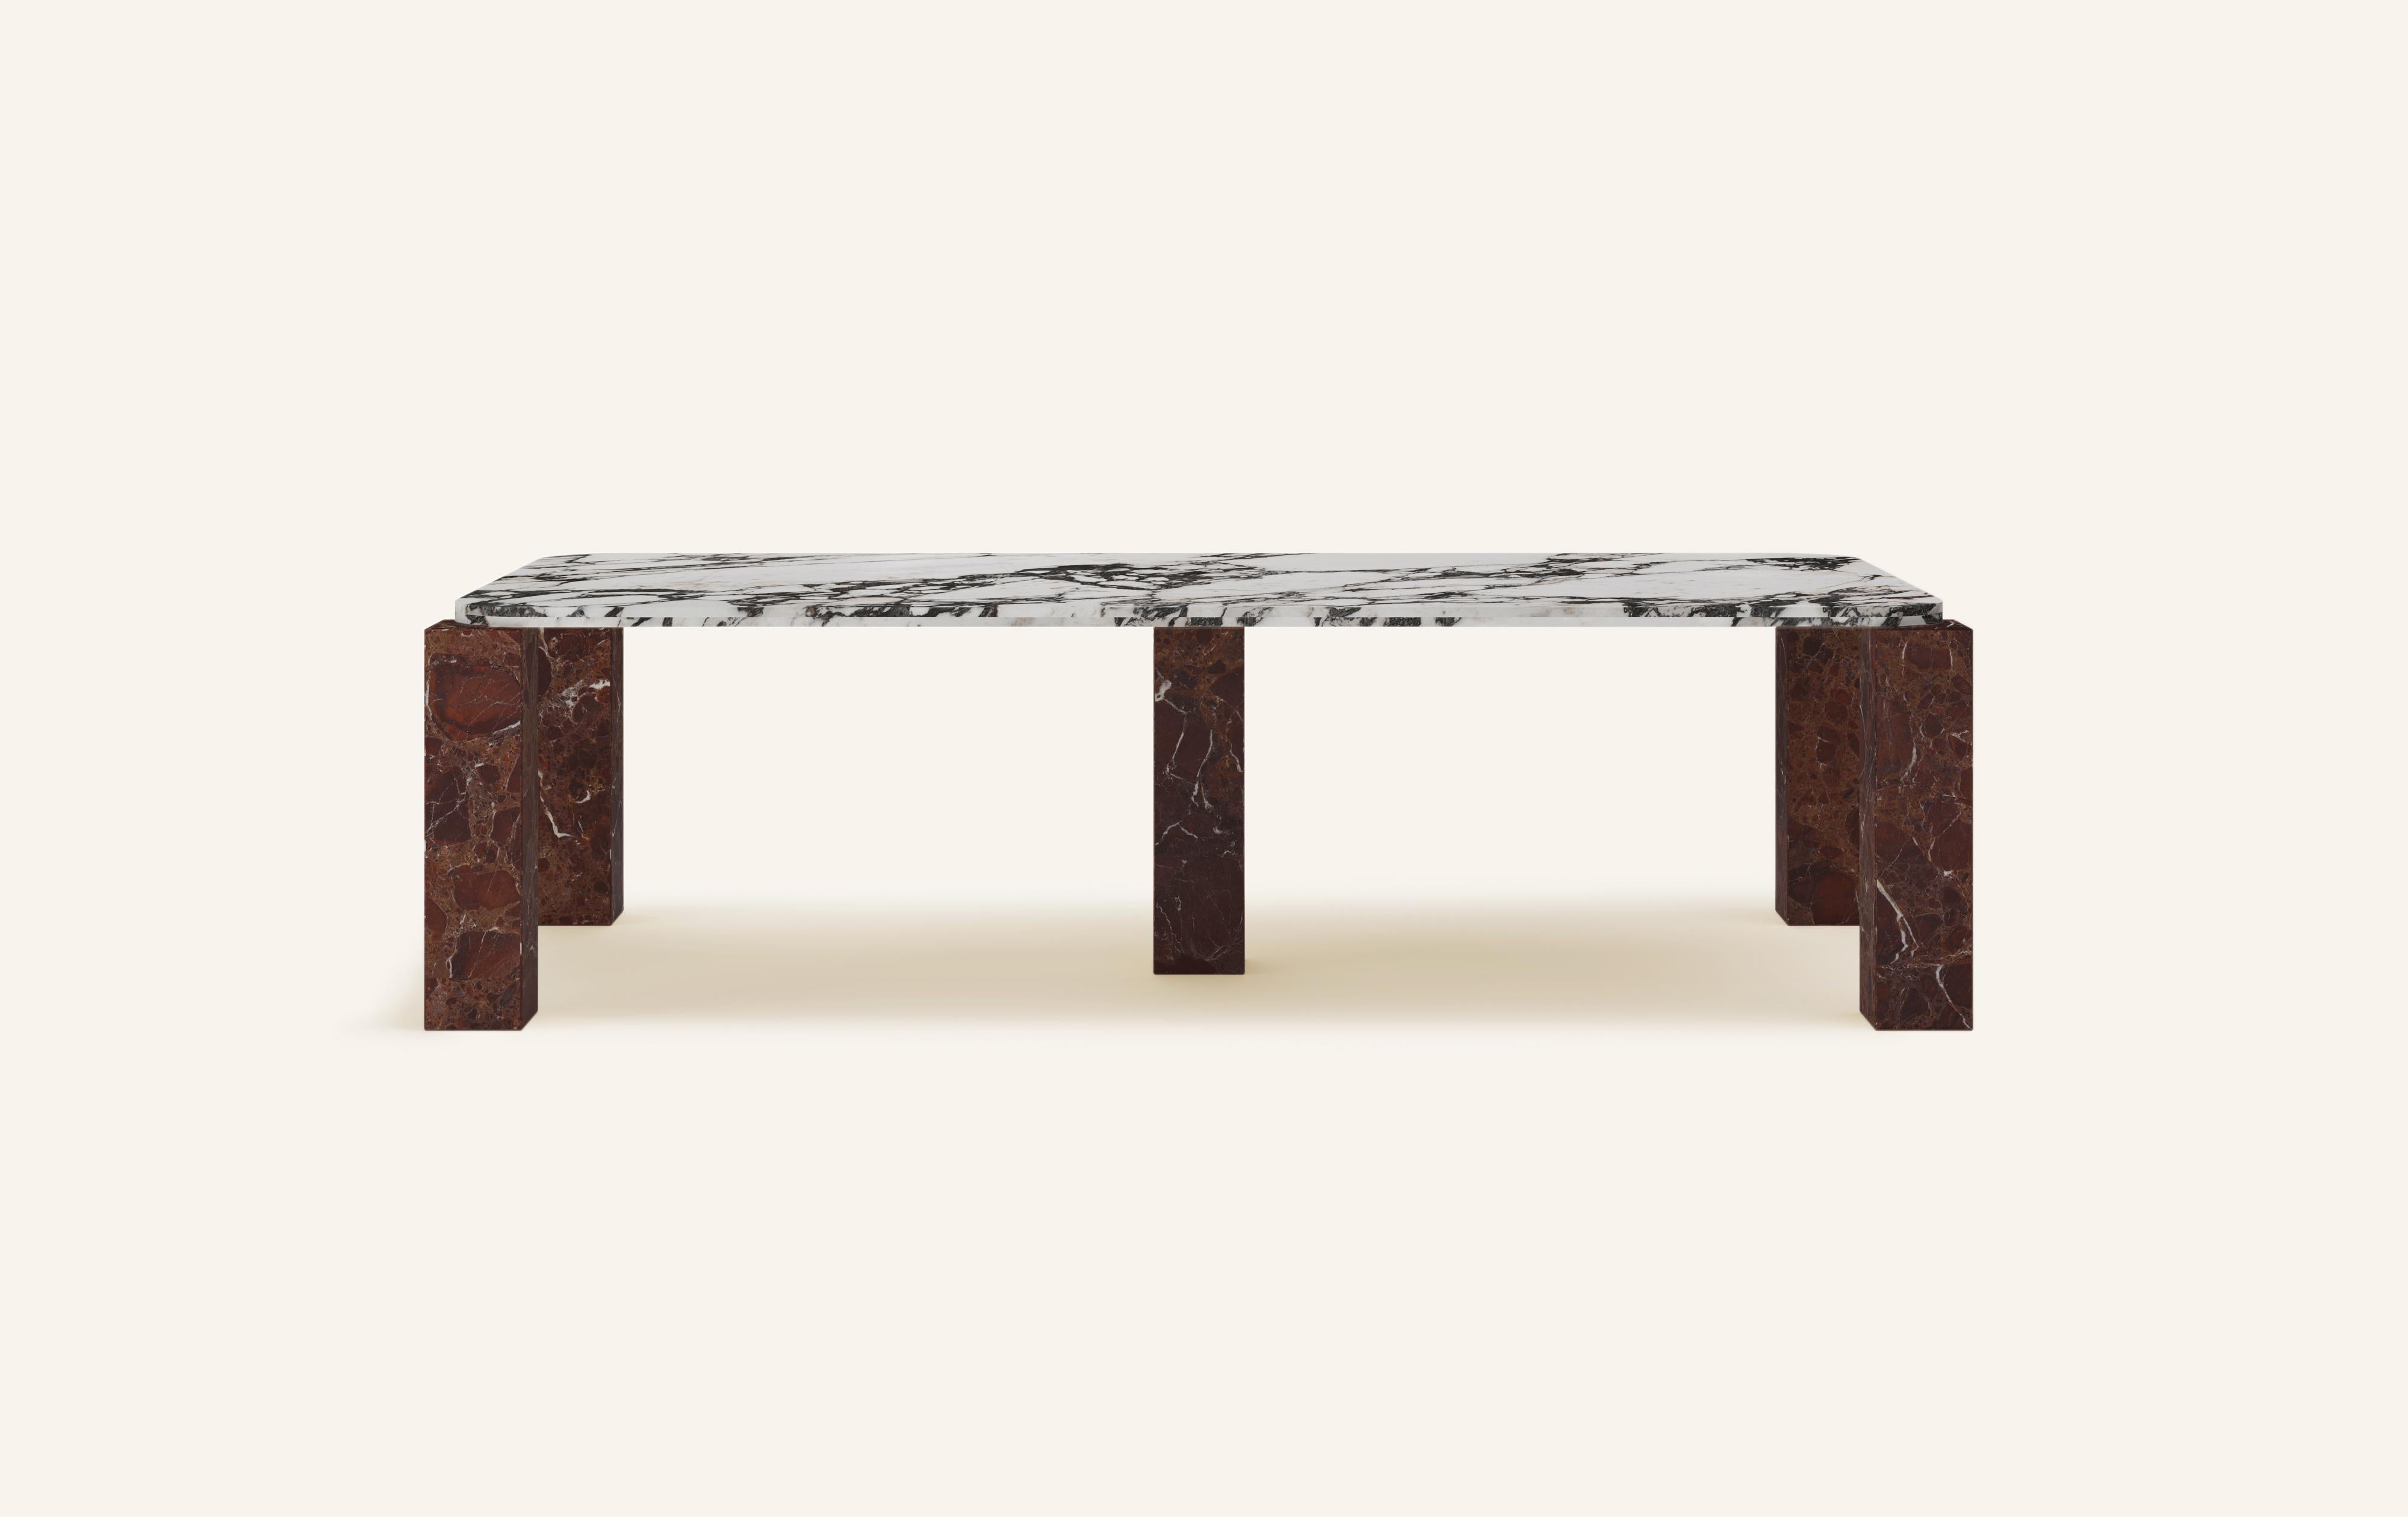 MONOLITHIC FORMS SOFTENED BY GENTLE EDGES. WITH ITS BOLD MARBLE PATTERNS CUBO IS AS VERSATILE AS IT IS STRIKING.

DIMENSIONS:
98”L x 44”W x 30”H: 
- 96”L x 42”W x 1.5” THICK TABLETOP WITH WITH 6